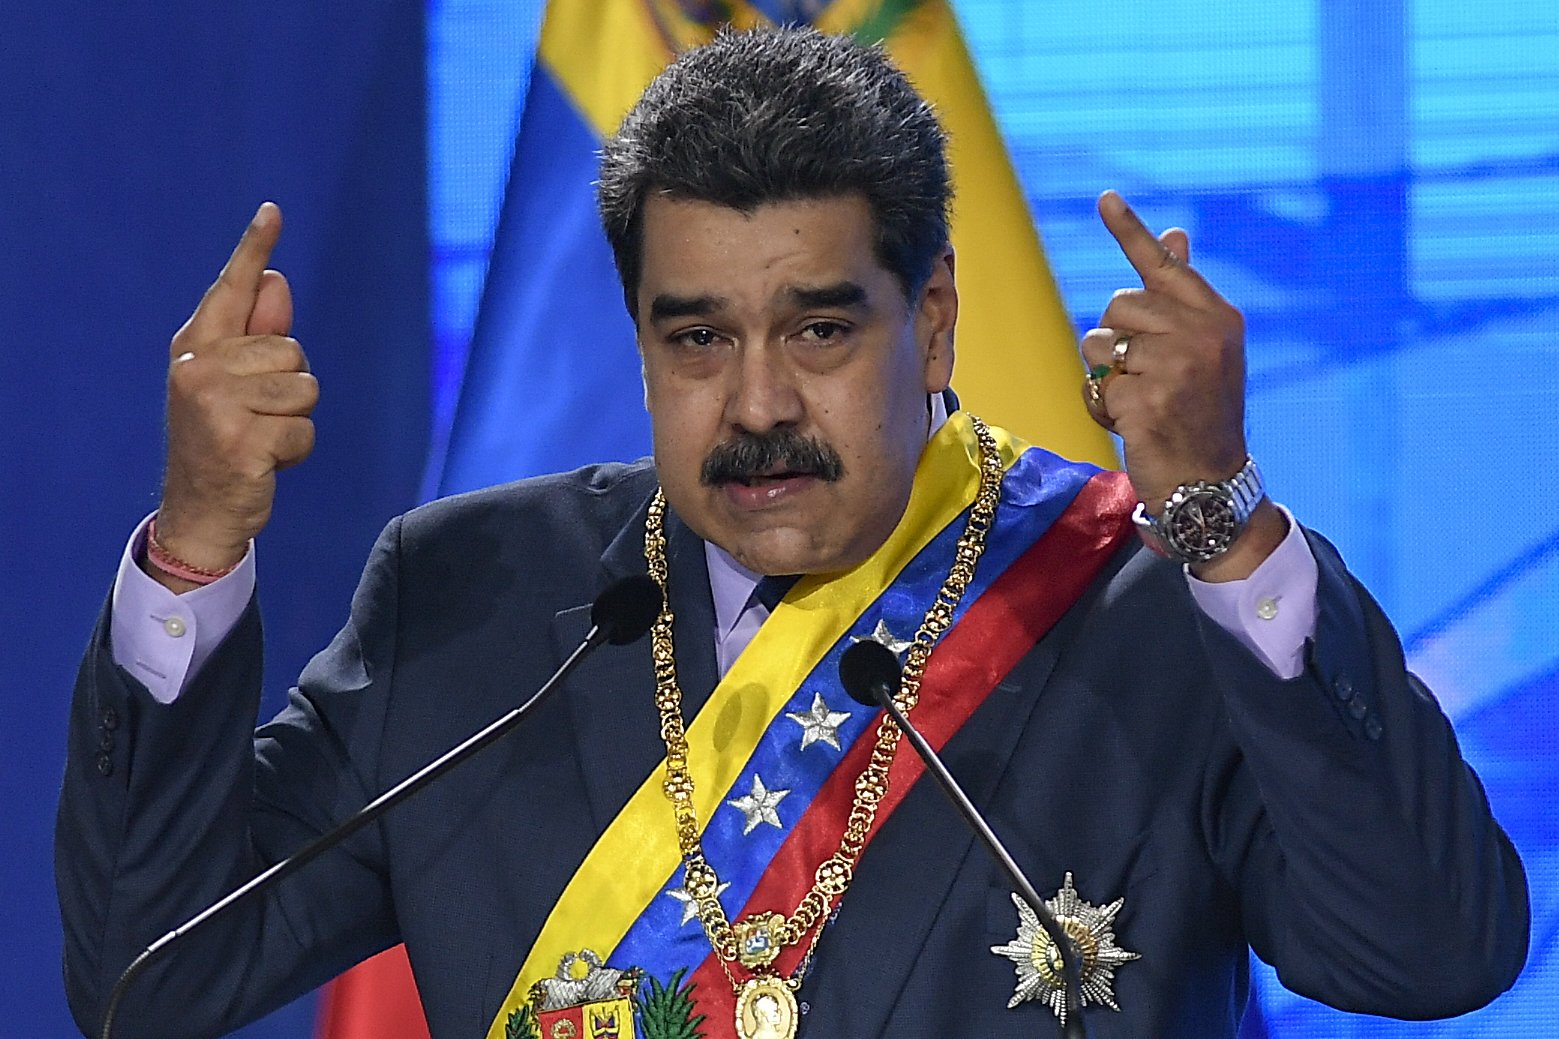 Venezuela hired a donor from the Democratic Party for $ 6 million